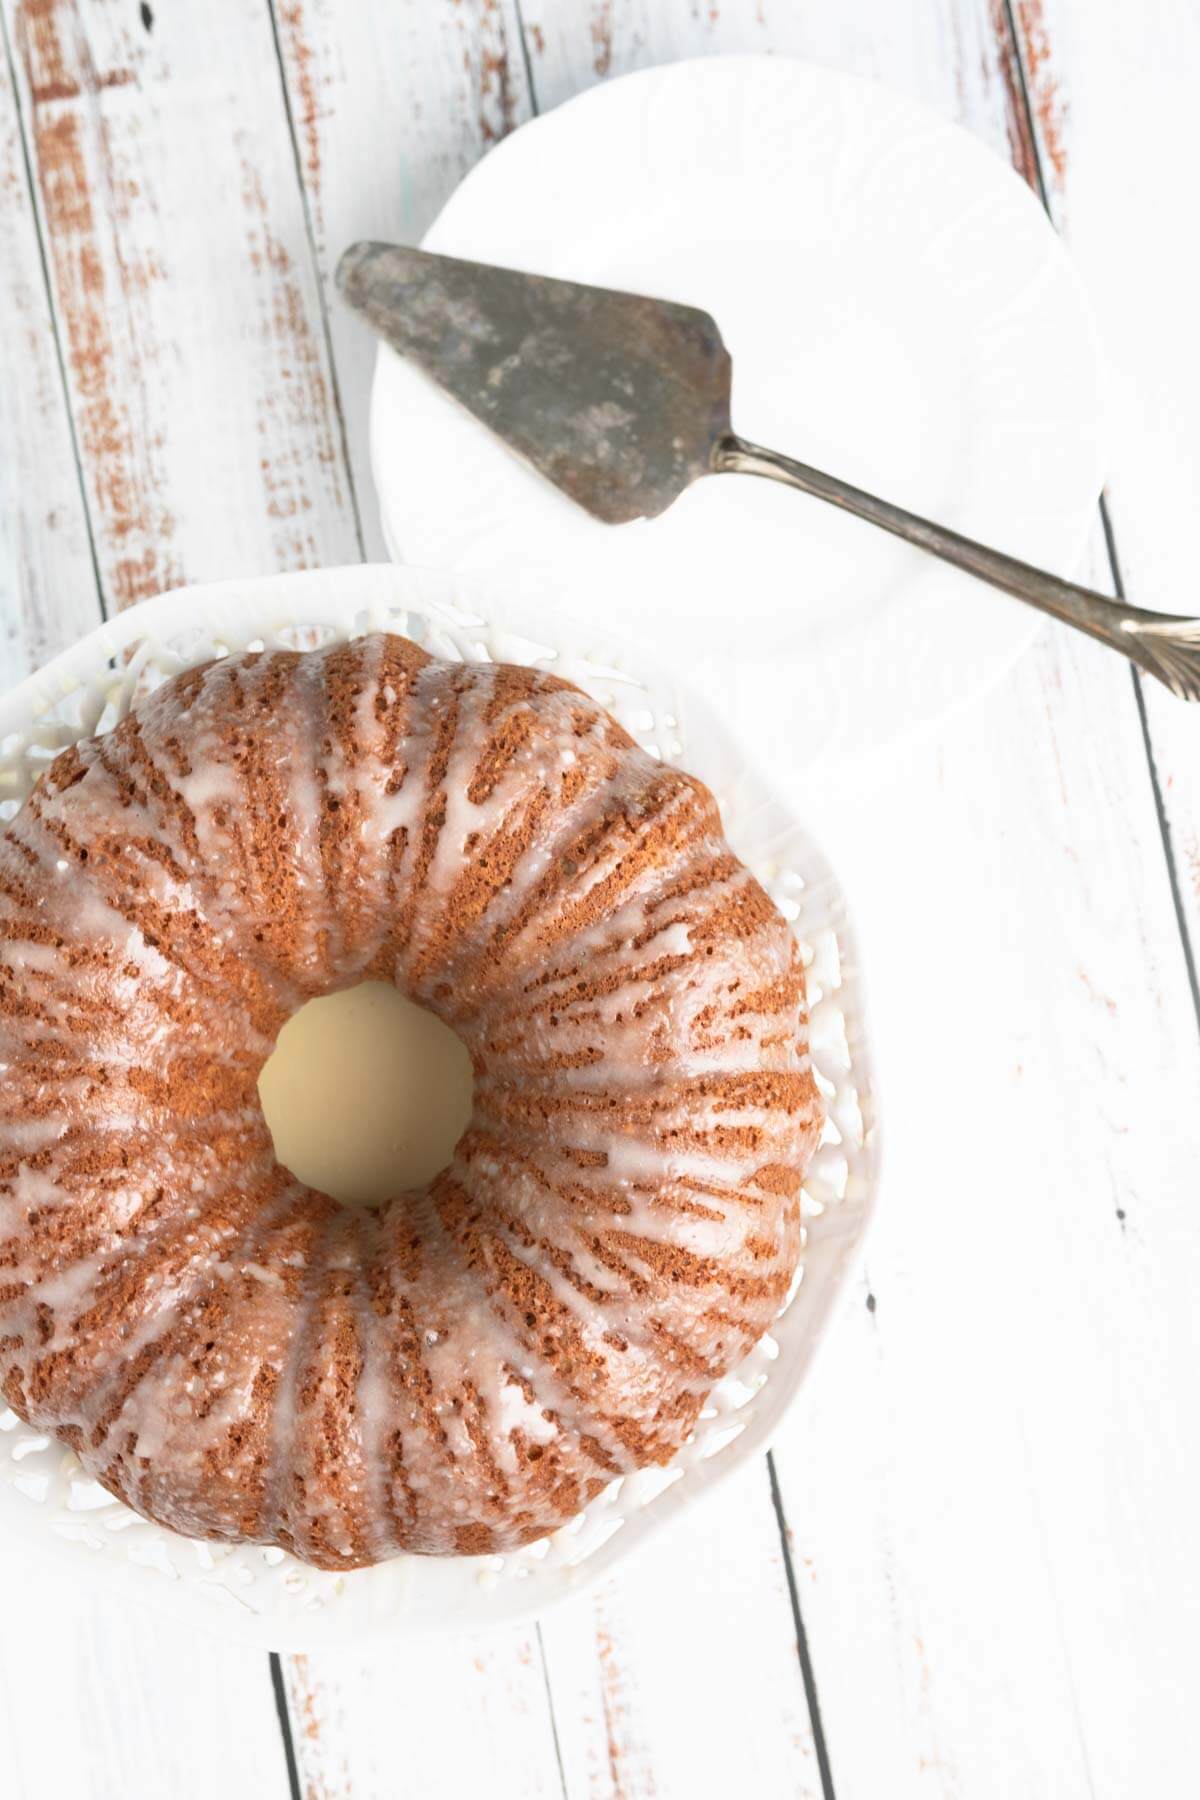 top view of a roasted banan cake on a white background and with a serving spoon